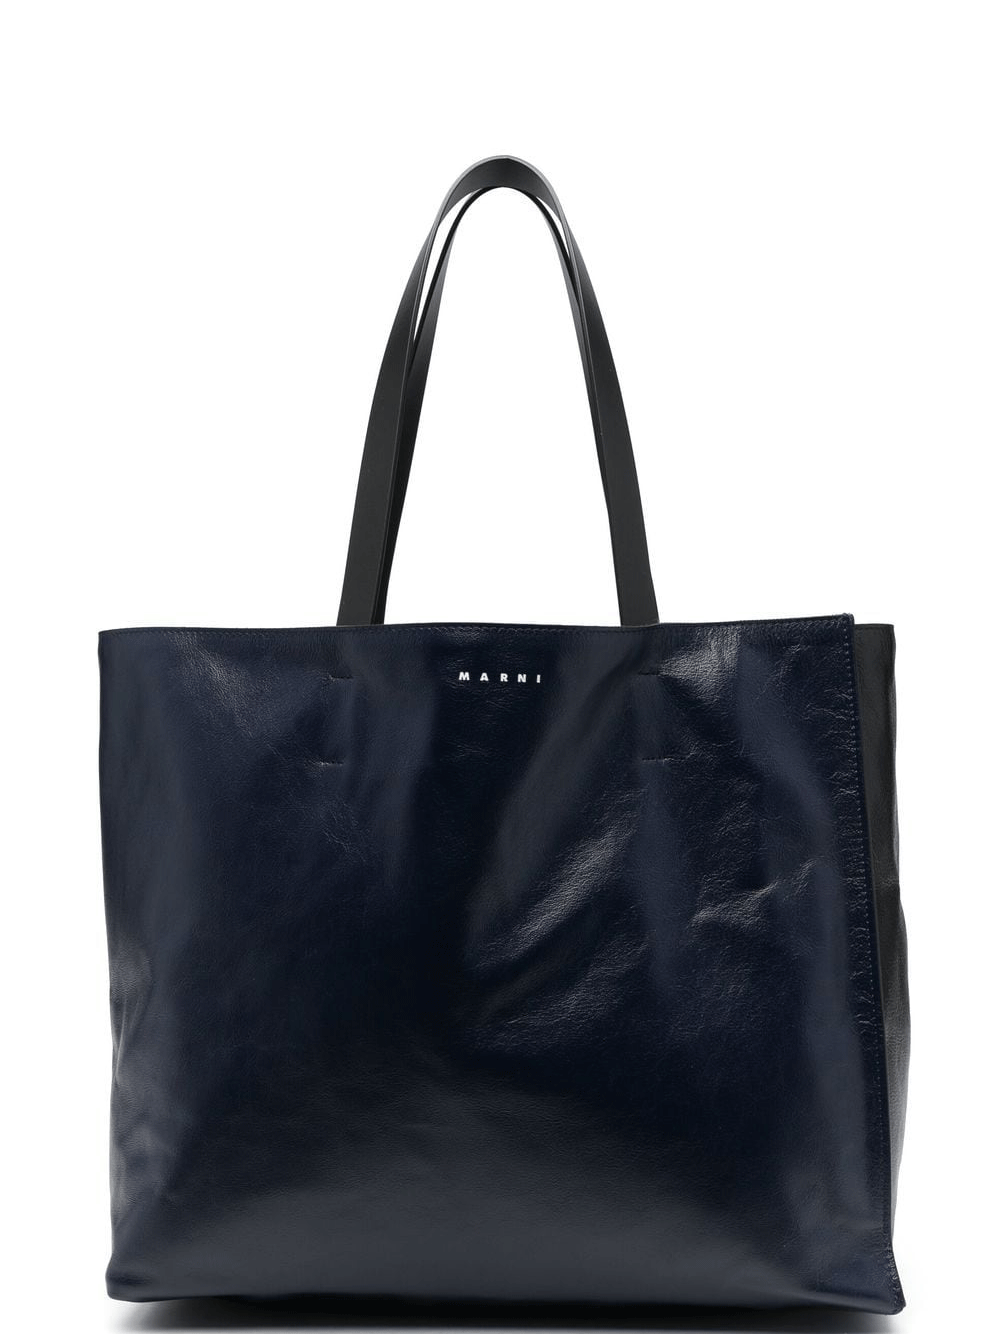 Marni-Mused-Soft-Calf-Leather-Tote-Navy-1